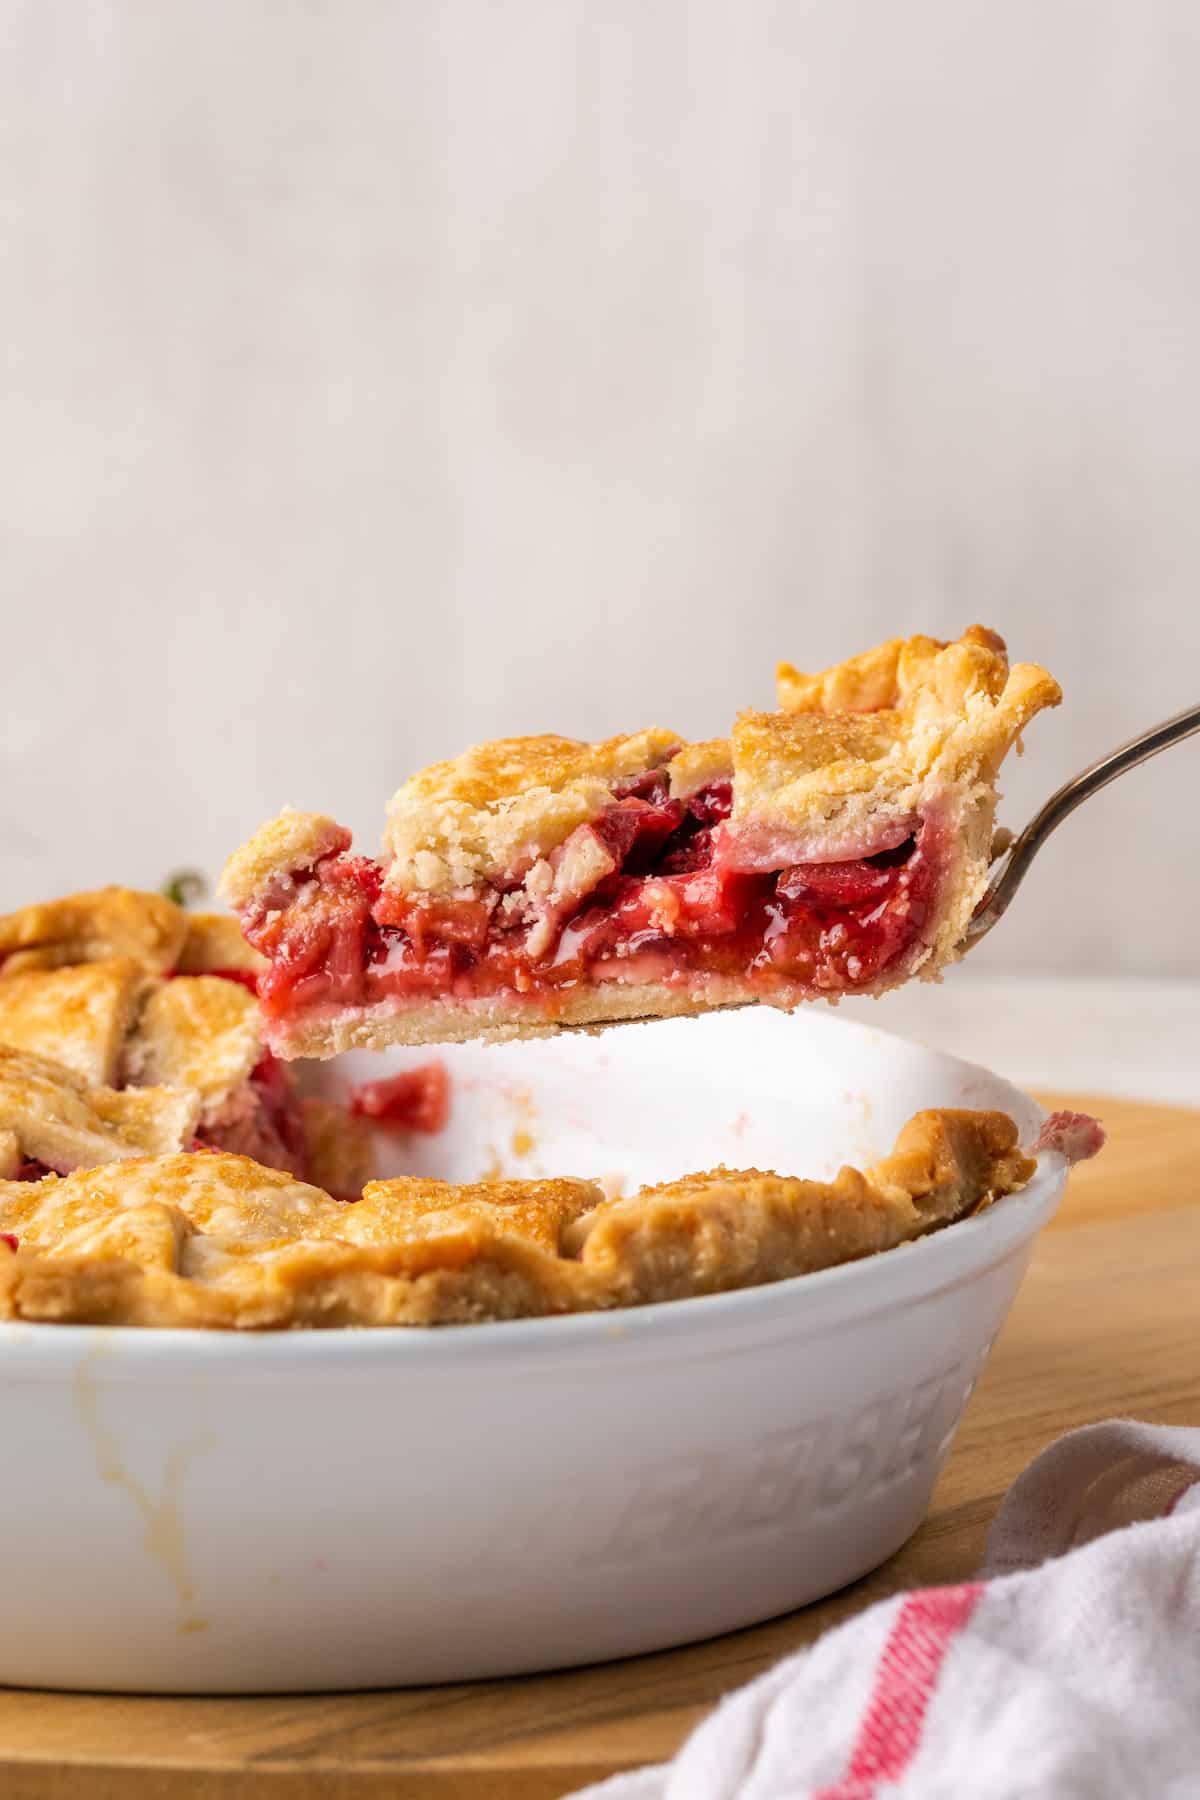 A pie server lifts out a slice of strawberry rhubarb pie.